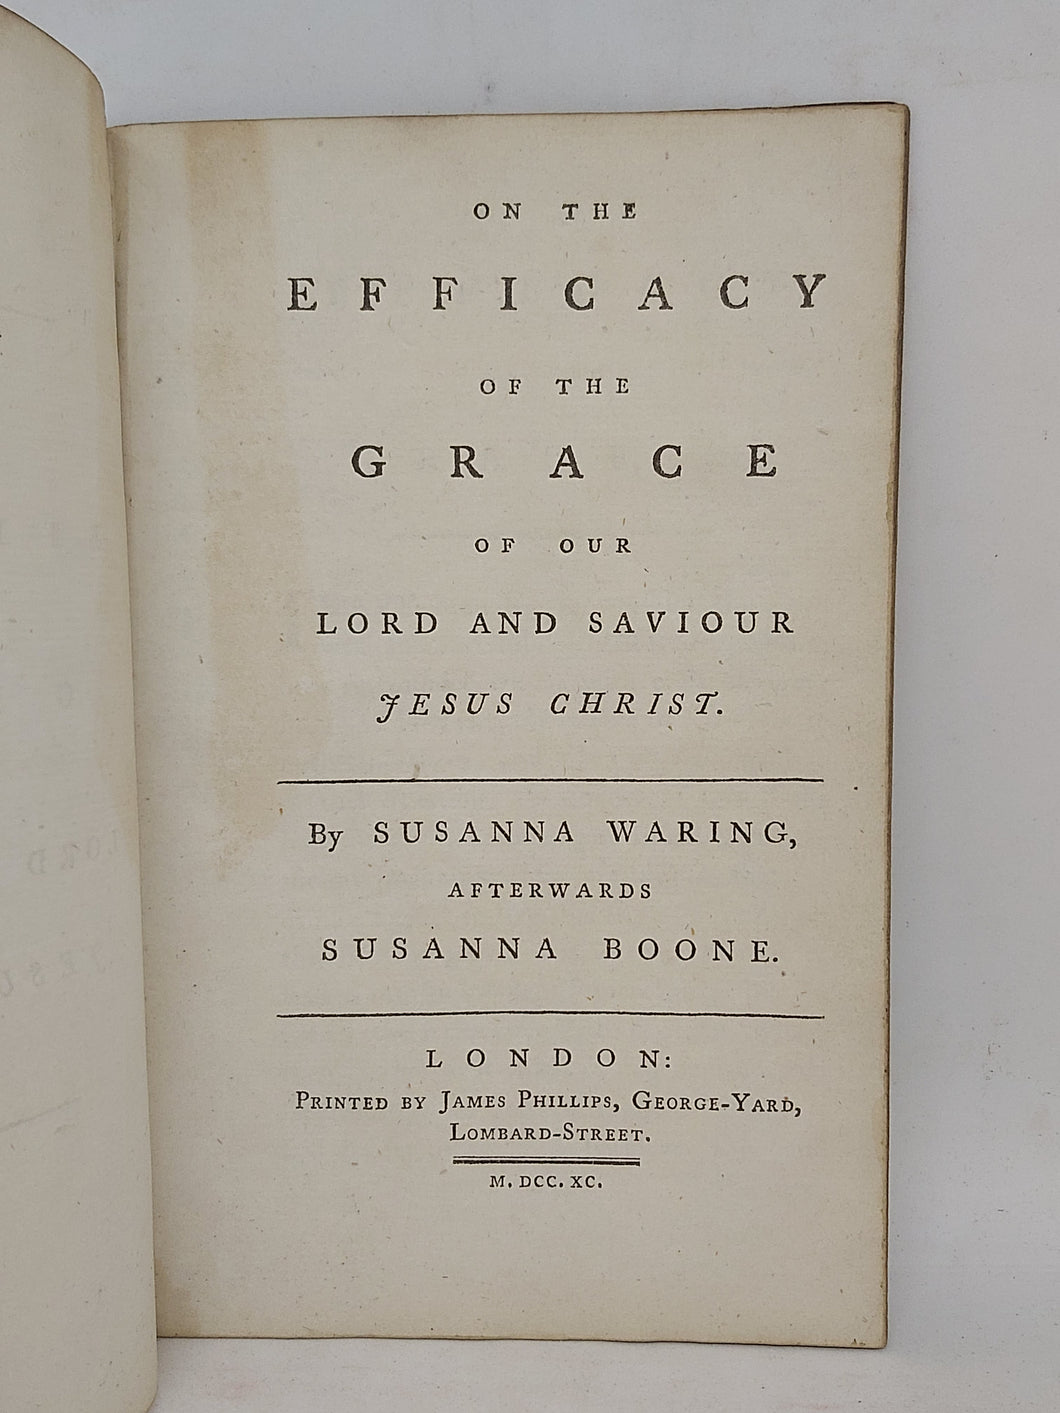 On the efficacy of the grace of our lord and saviour Jesus Christ, 1790